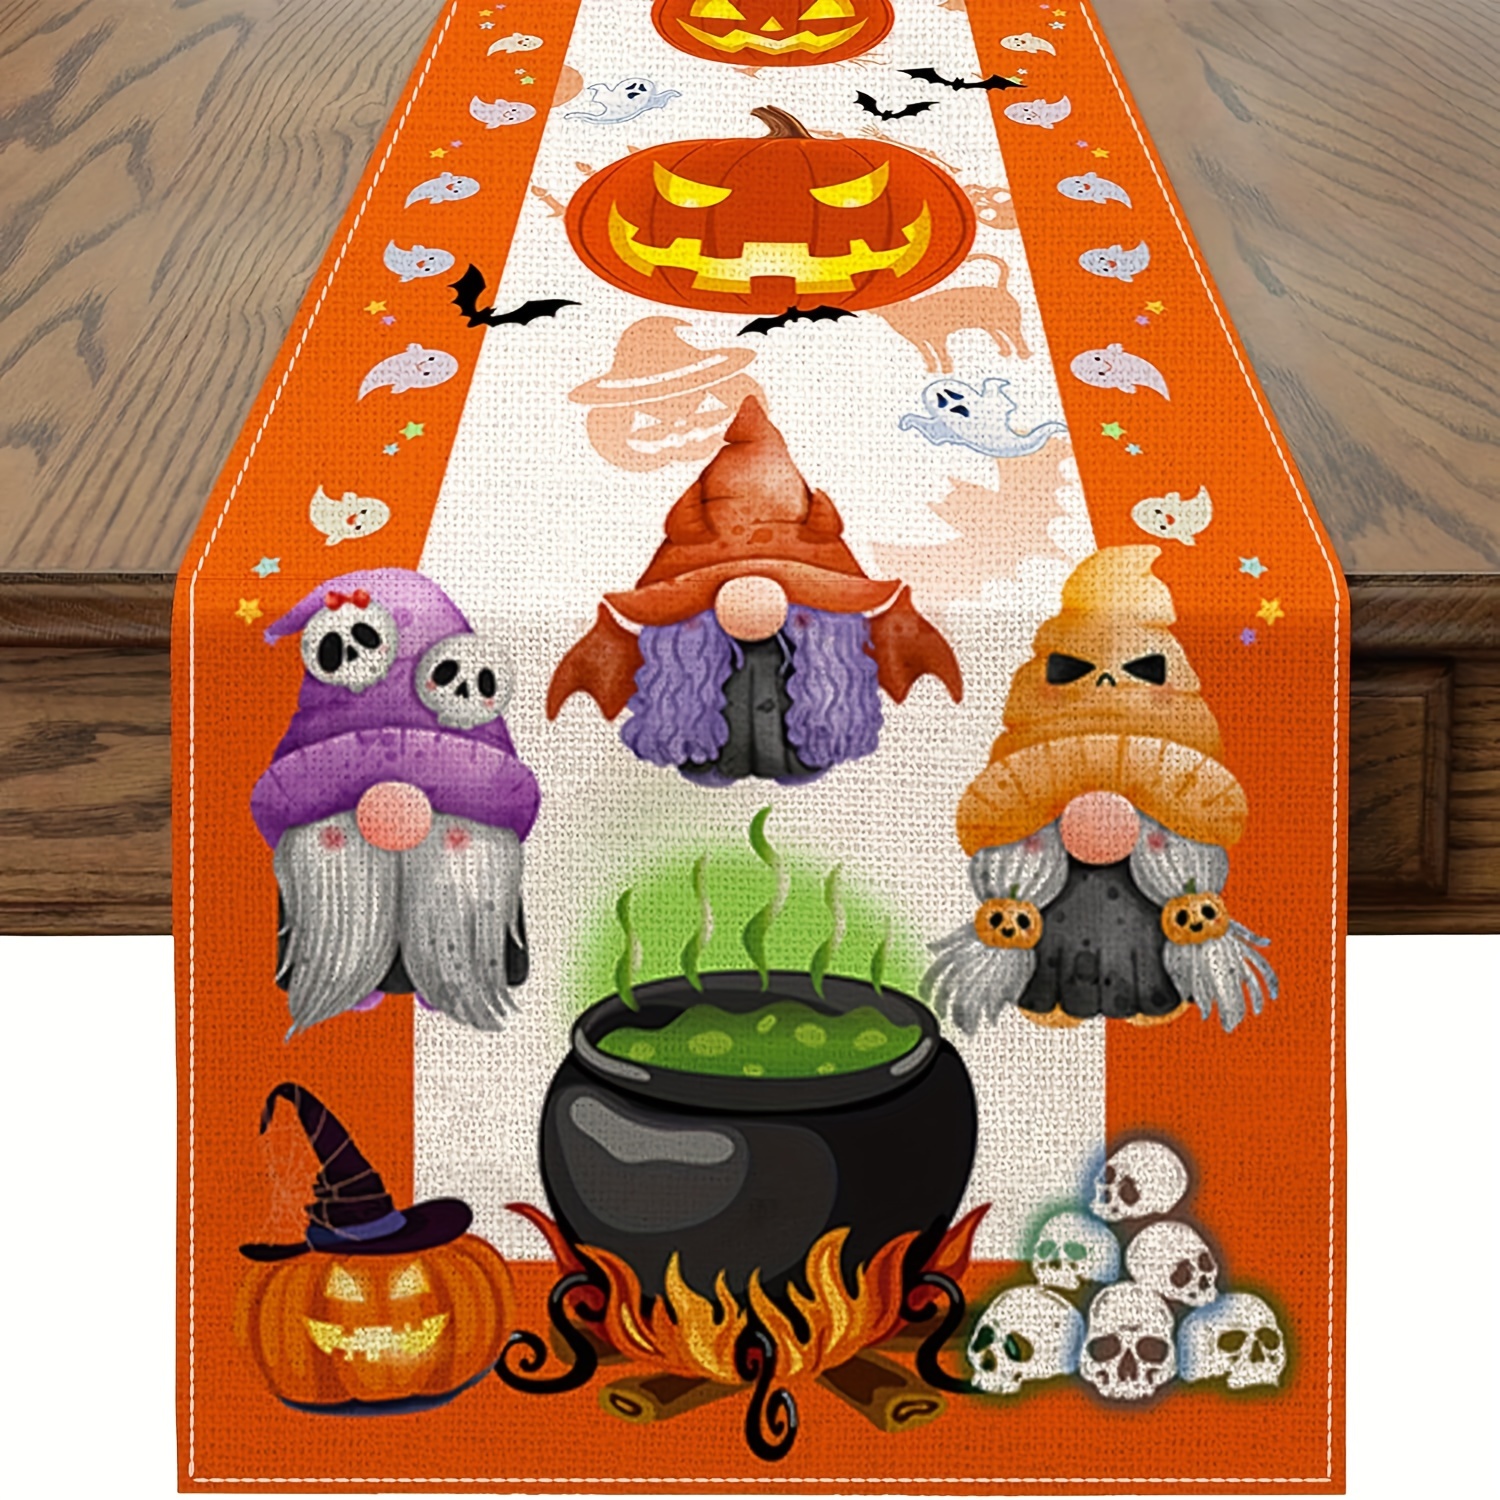 

1pc, Table Runner, Halloween Theme Gnome And Pumpkin Printed Table Runner, Dustproof & Wipe Clean Table Runner, Perfect For Home Party Decor, Dining Table Decoration, Festival Party Decor, Fall Decor